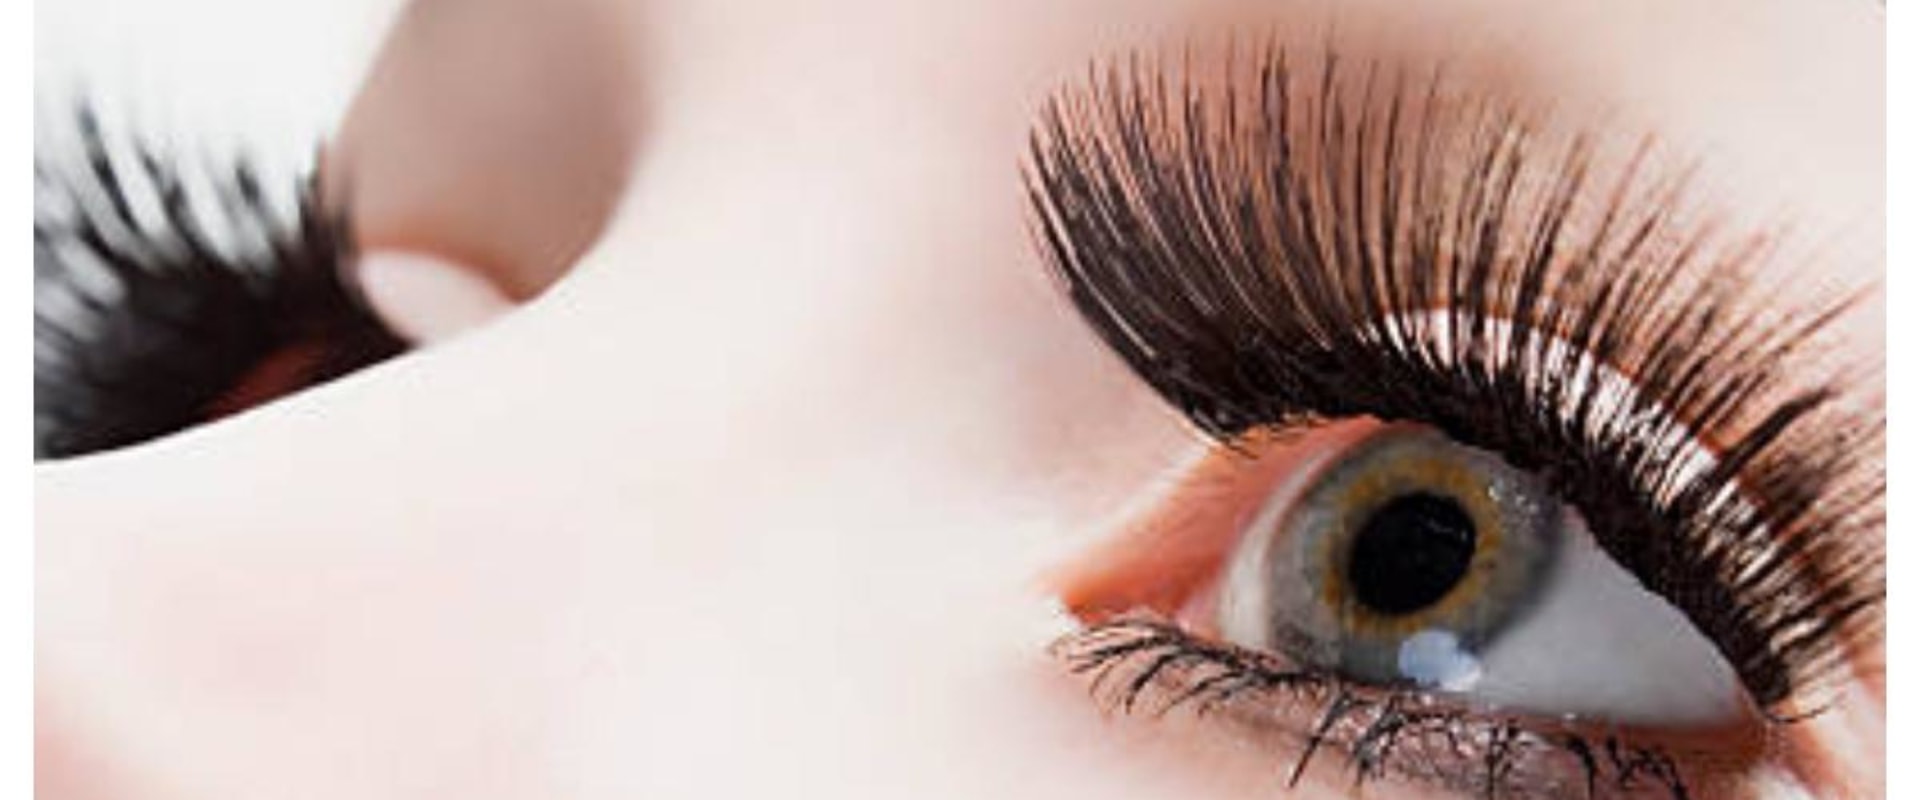 Do you need a license to do eyelash extensions in new york?